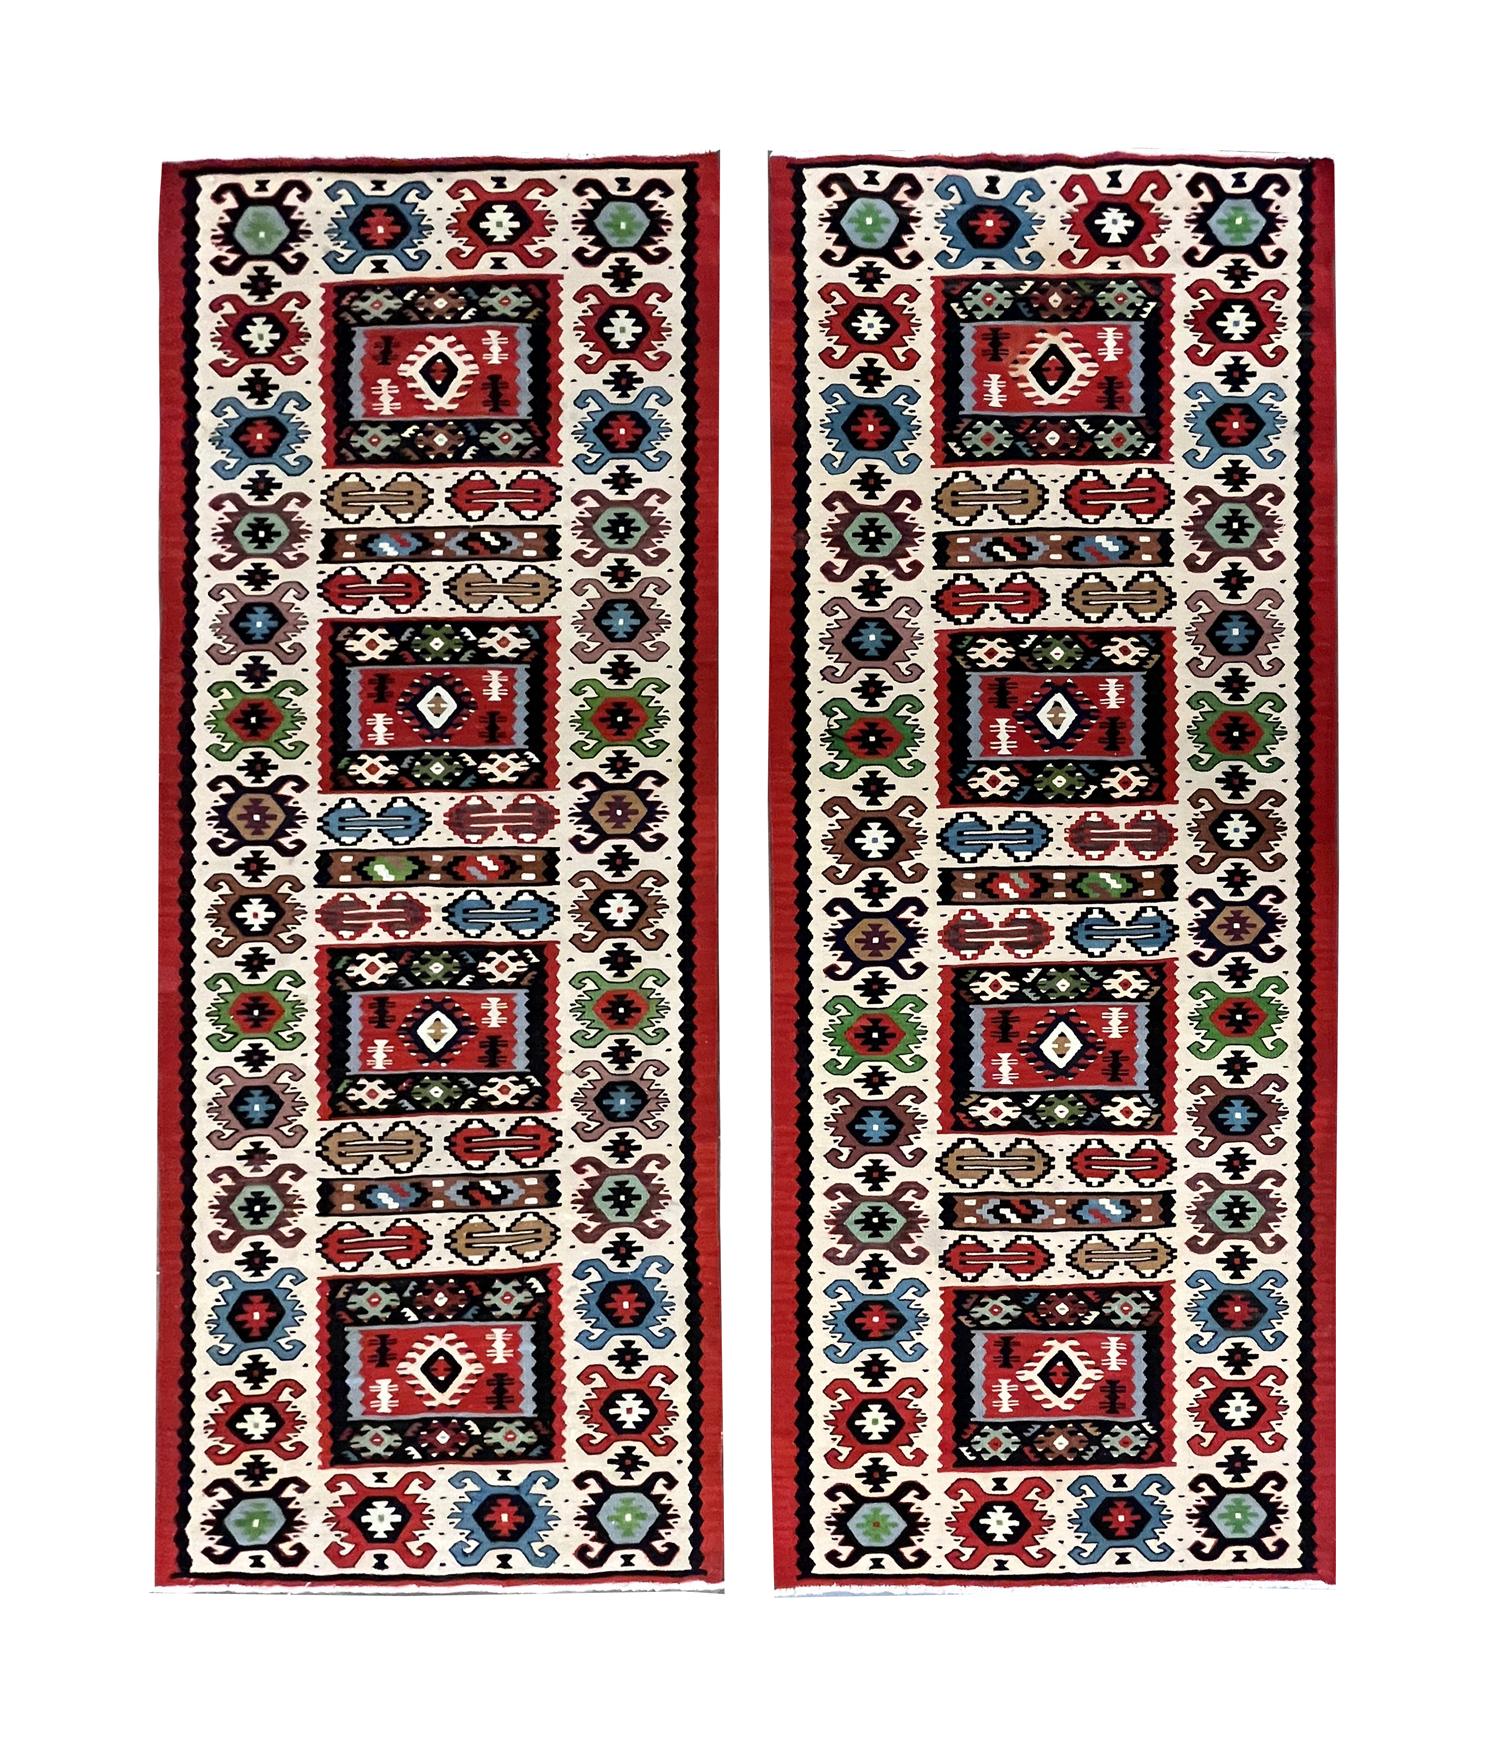 Pair of Kilims Traditional Handmade Red Wool Turkish Runner Rugs In Excellent Condition For Sale In Hampshire, GB